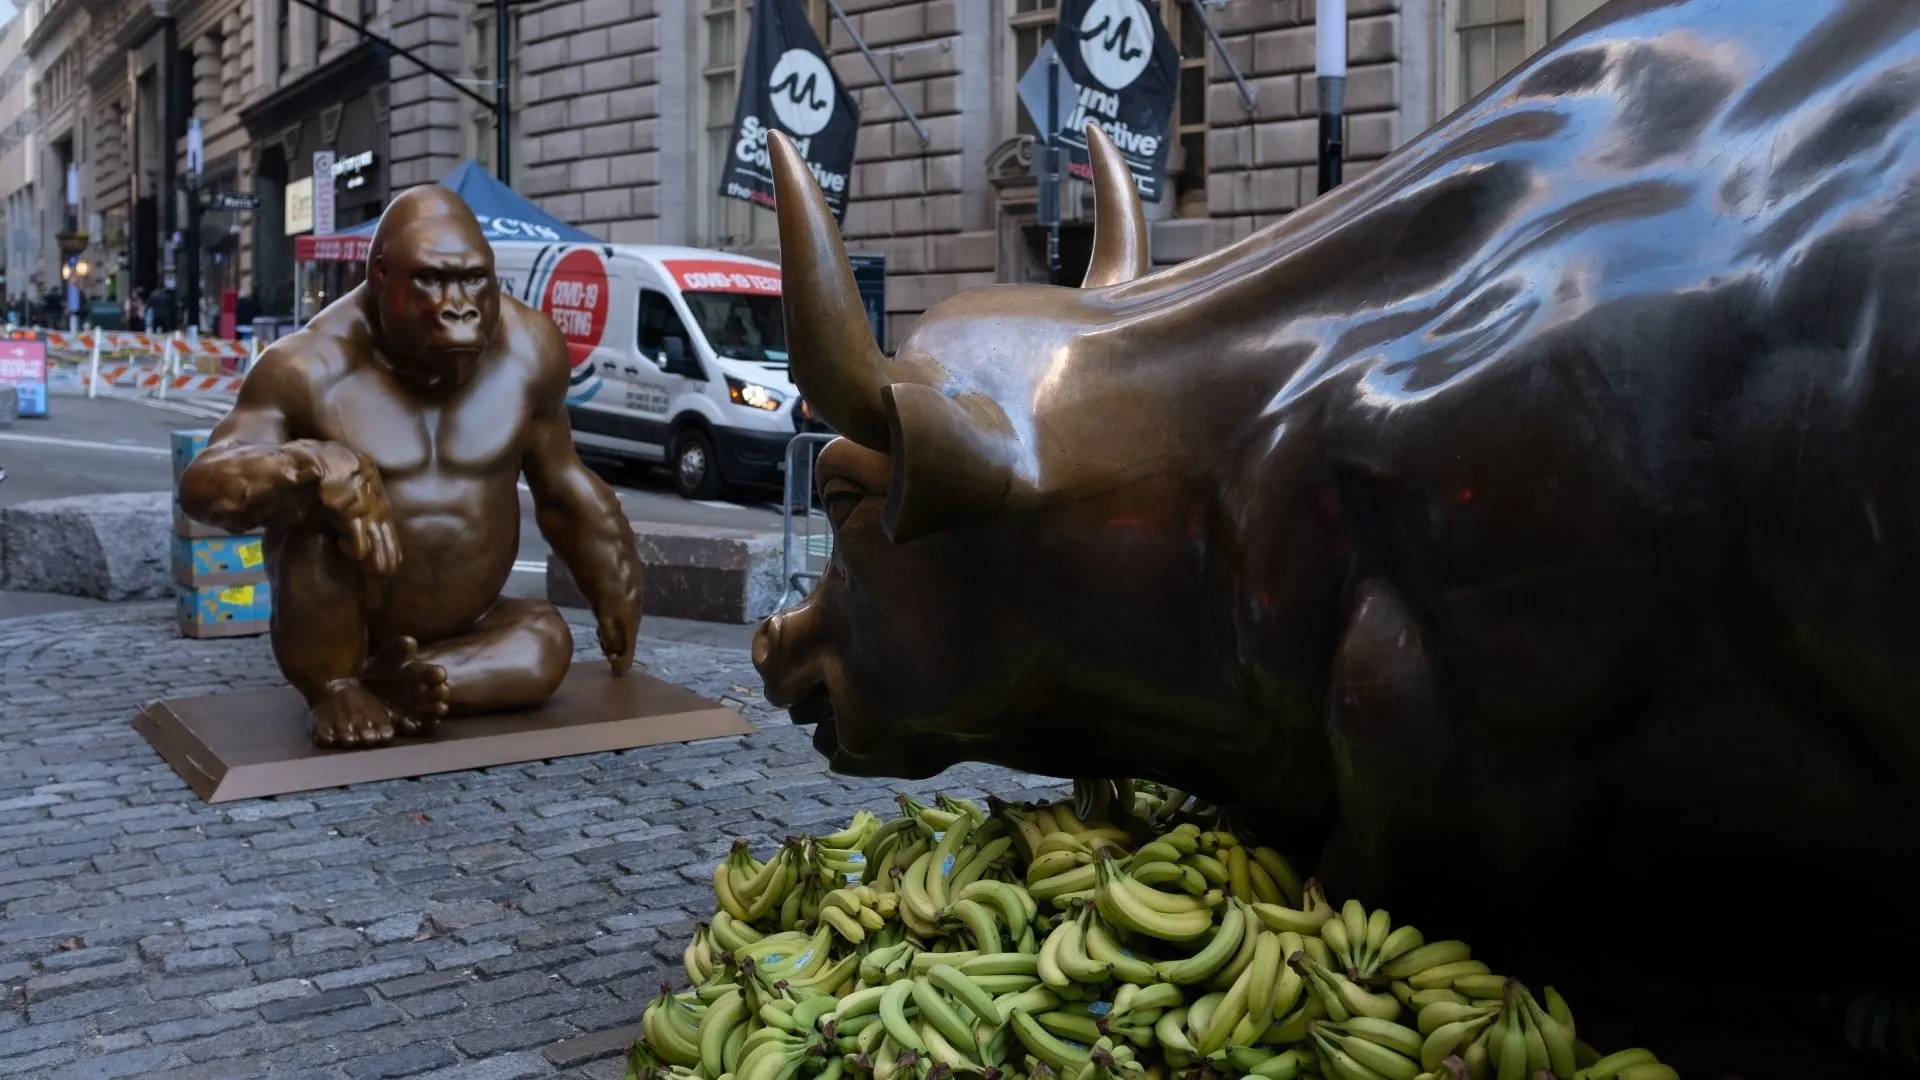 1920x1080 7-foot tall Harambe statue appears opposite of Charging Bull covered in bananas | PIX11